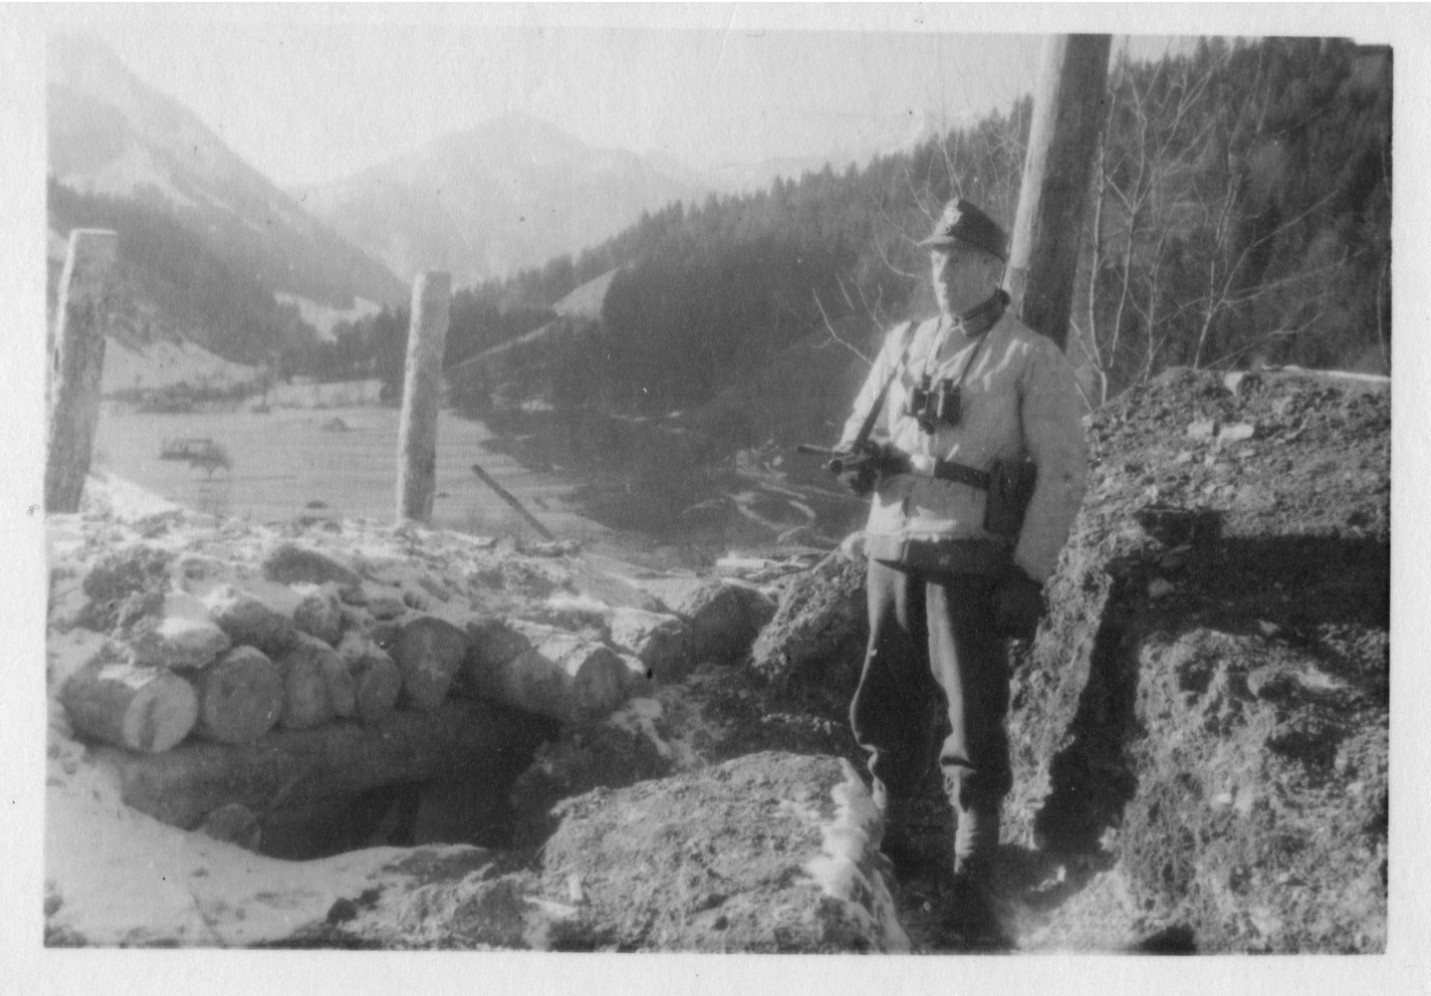 My grandfather during war time in front of a trench. He wears a soldiers shield cap, a light-colored jacket, dark trousers and boots. He is armed with a machine gun and carries binoculars. In the background a wooded mountain range and houses and streets in the valley